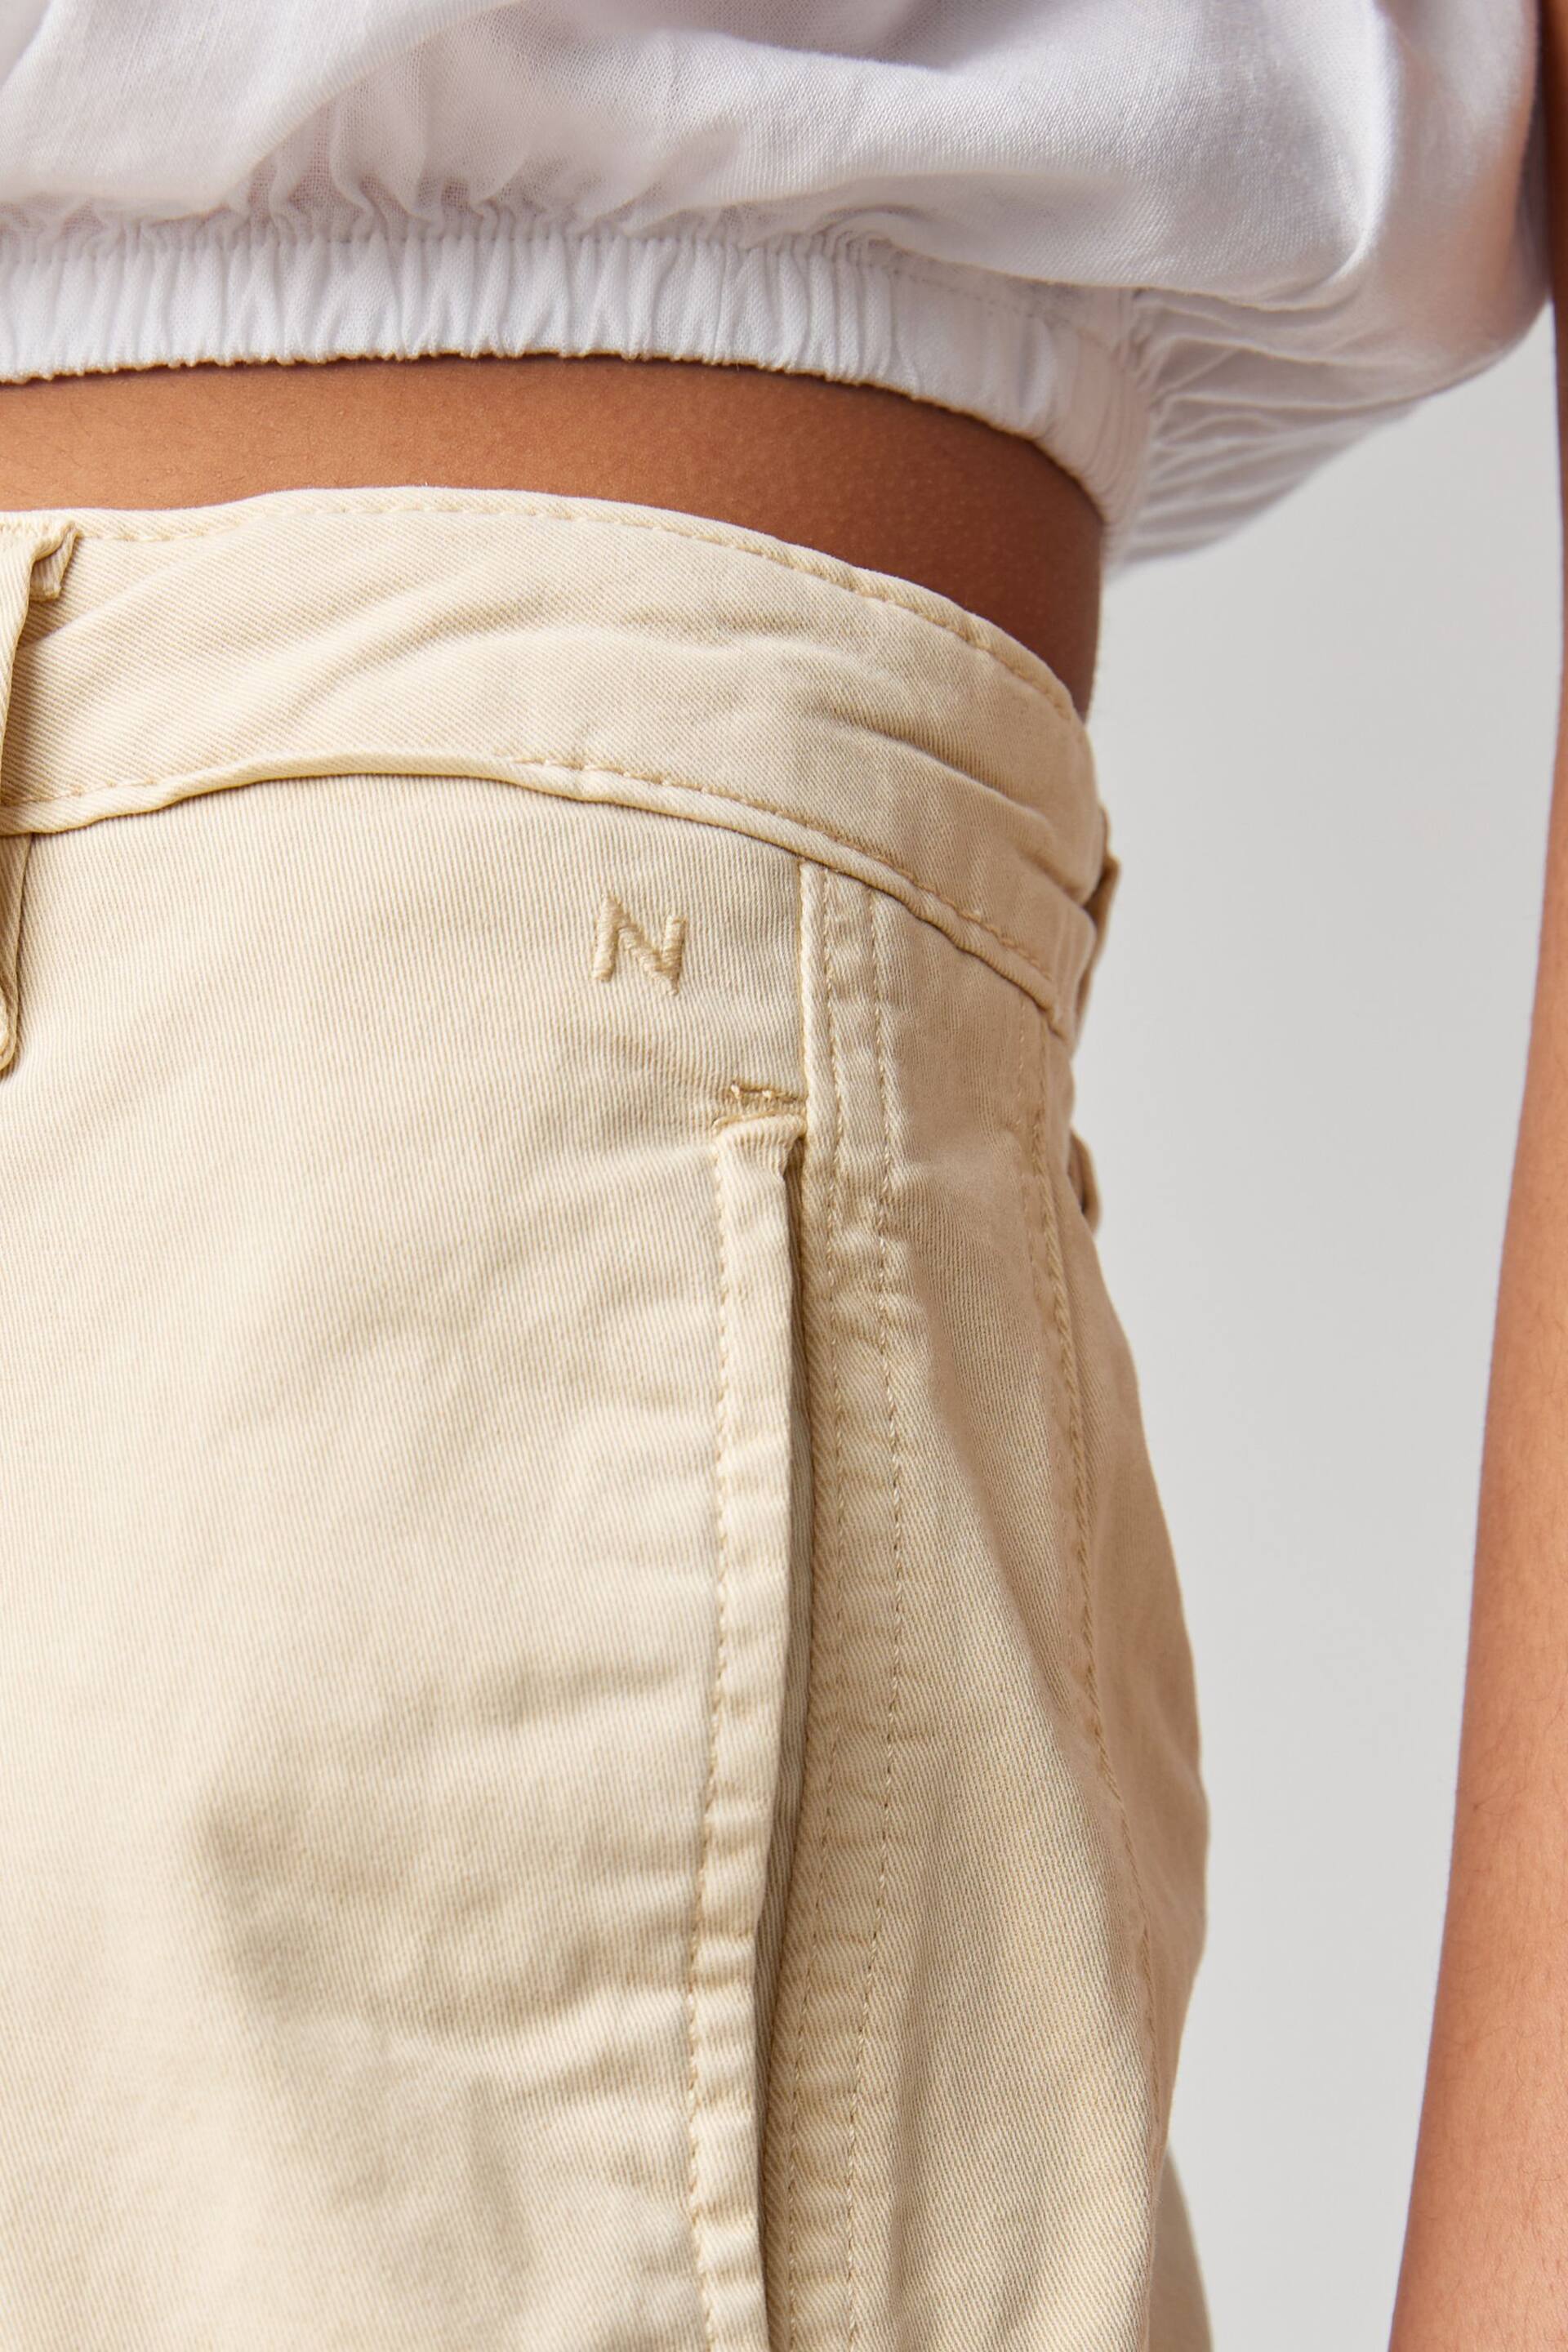 Neutral Chino Knee Length Shorts - Image 2 of 6